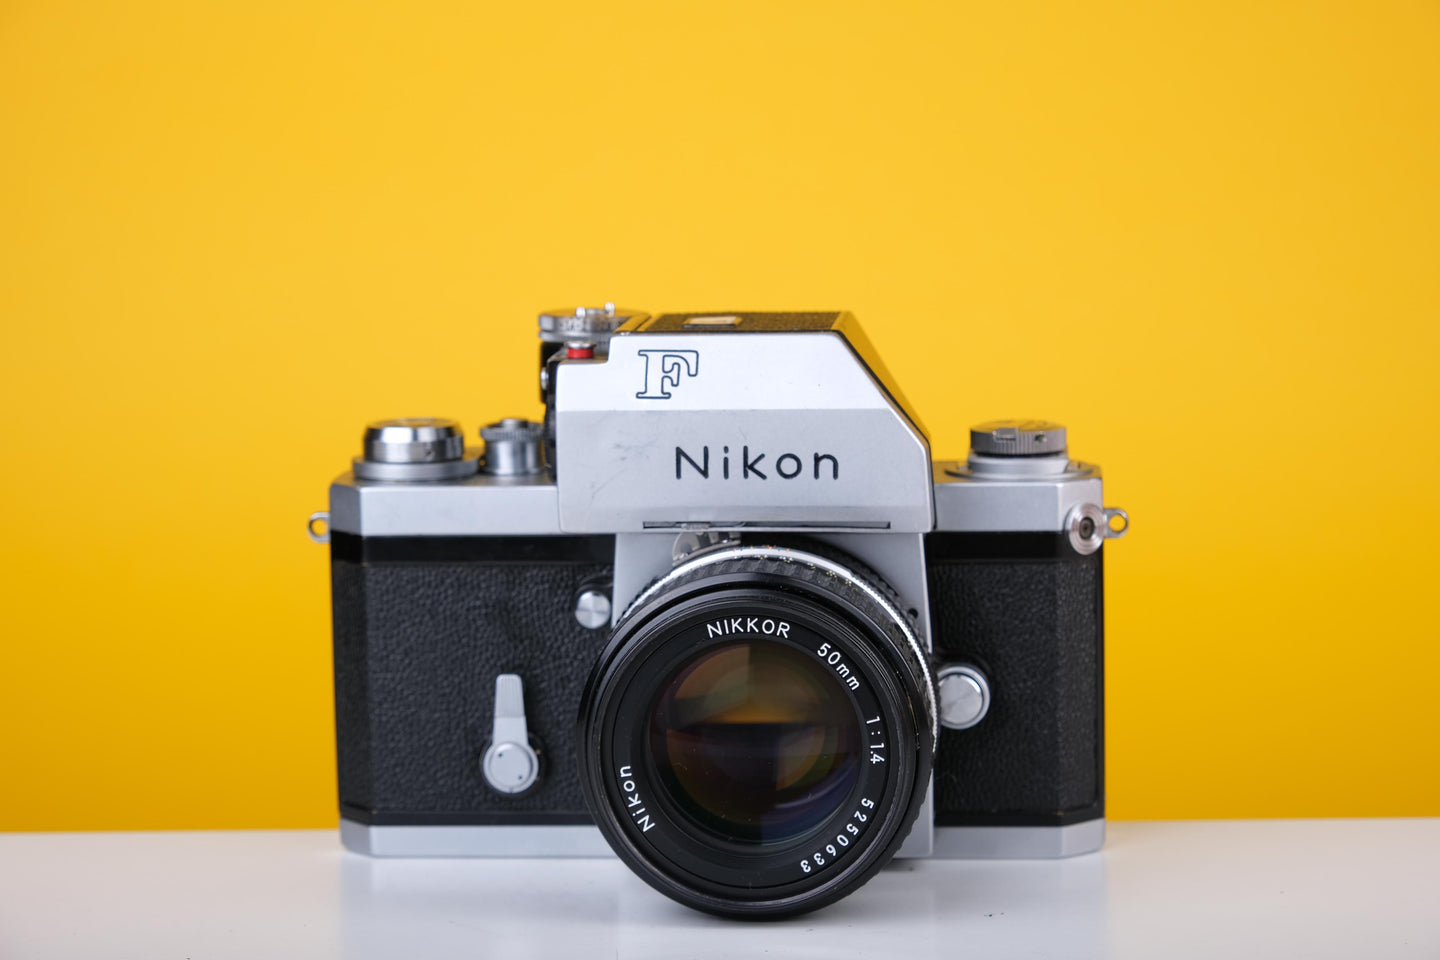 Nikon F Photomic 35mm Film Camera with Nikkor-S Auto 50mm f/1.4 Lens